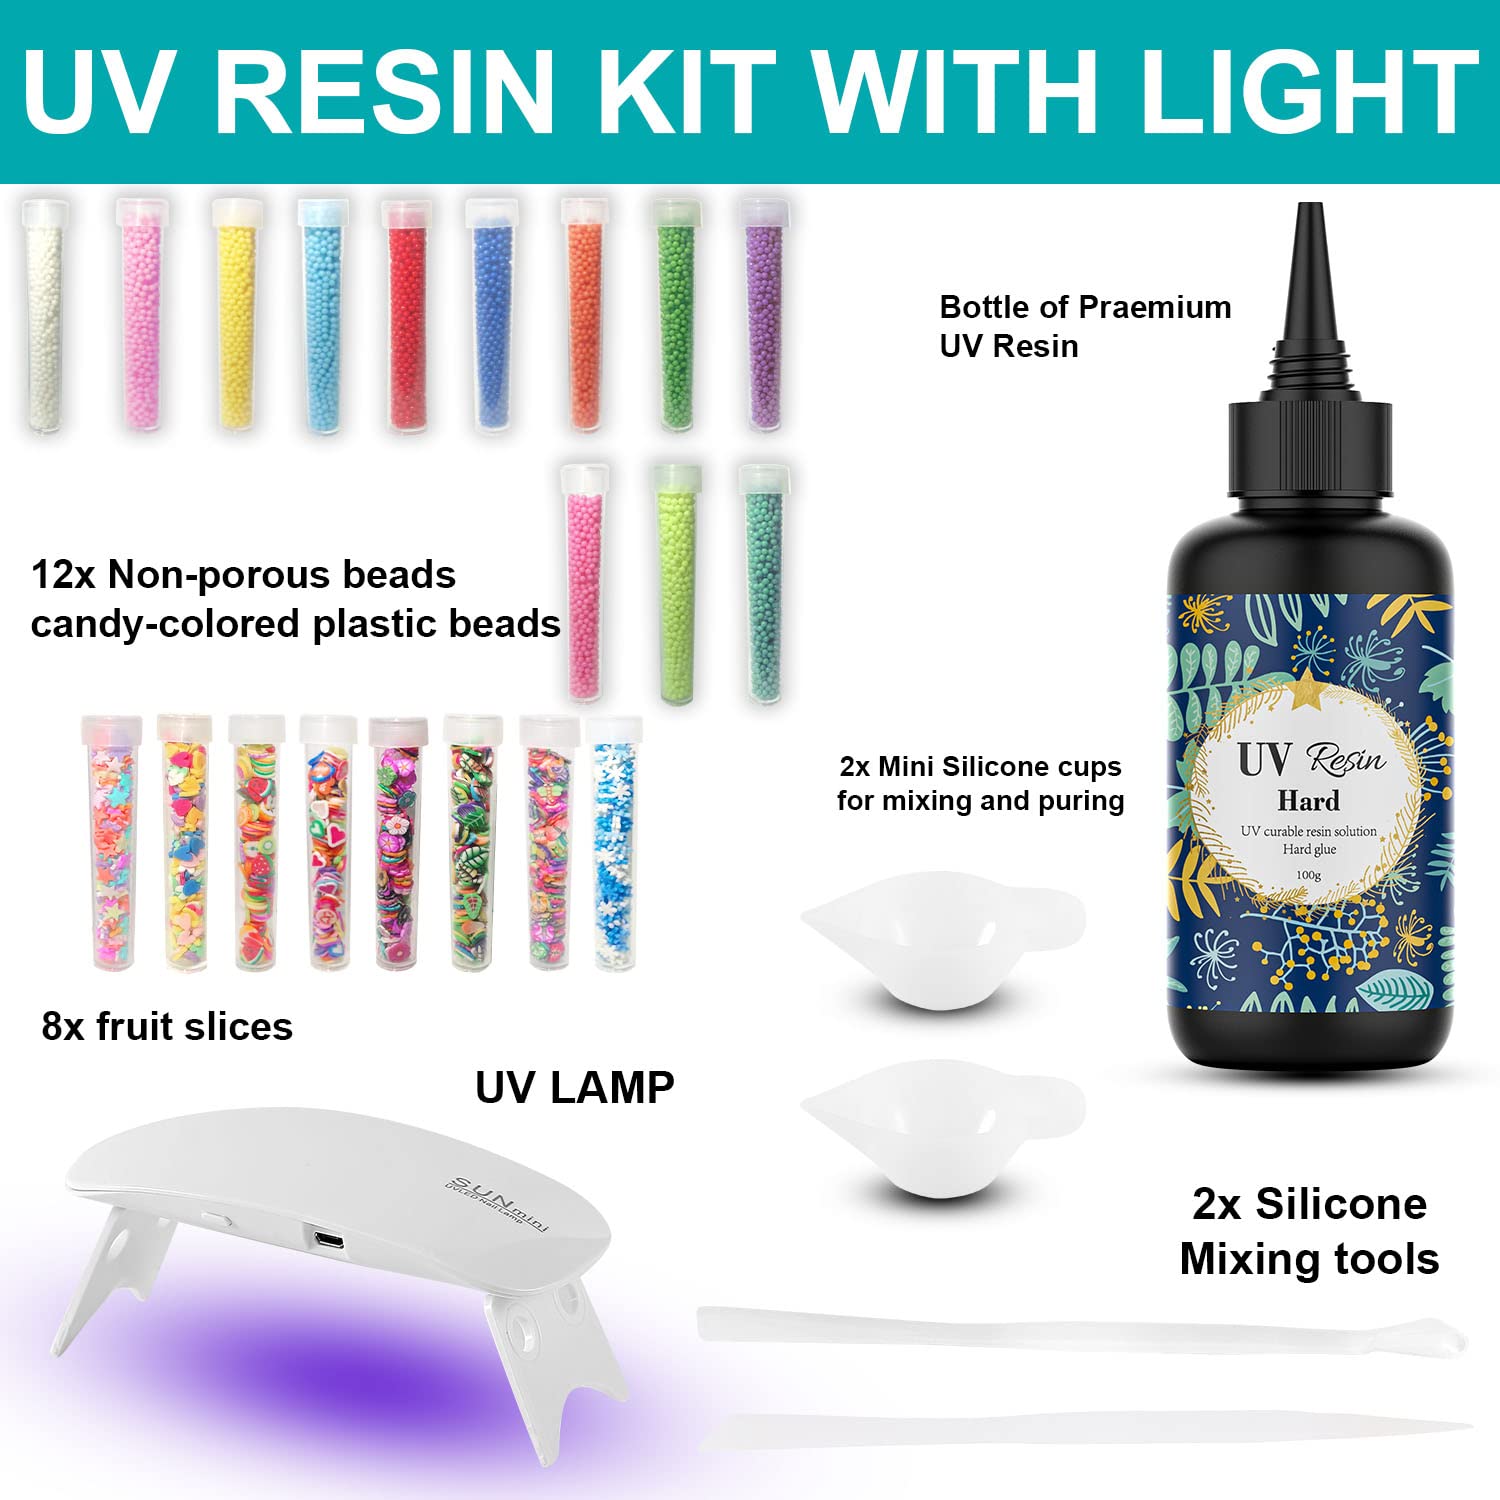 UV Resin Kit with Light -100g Upgraded Crystal Clear Hard for UV